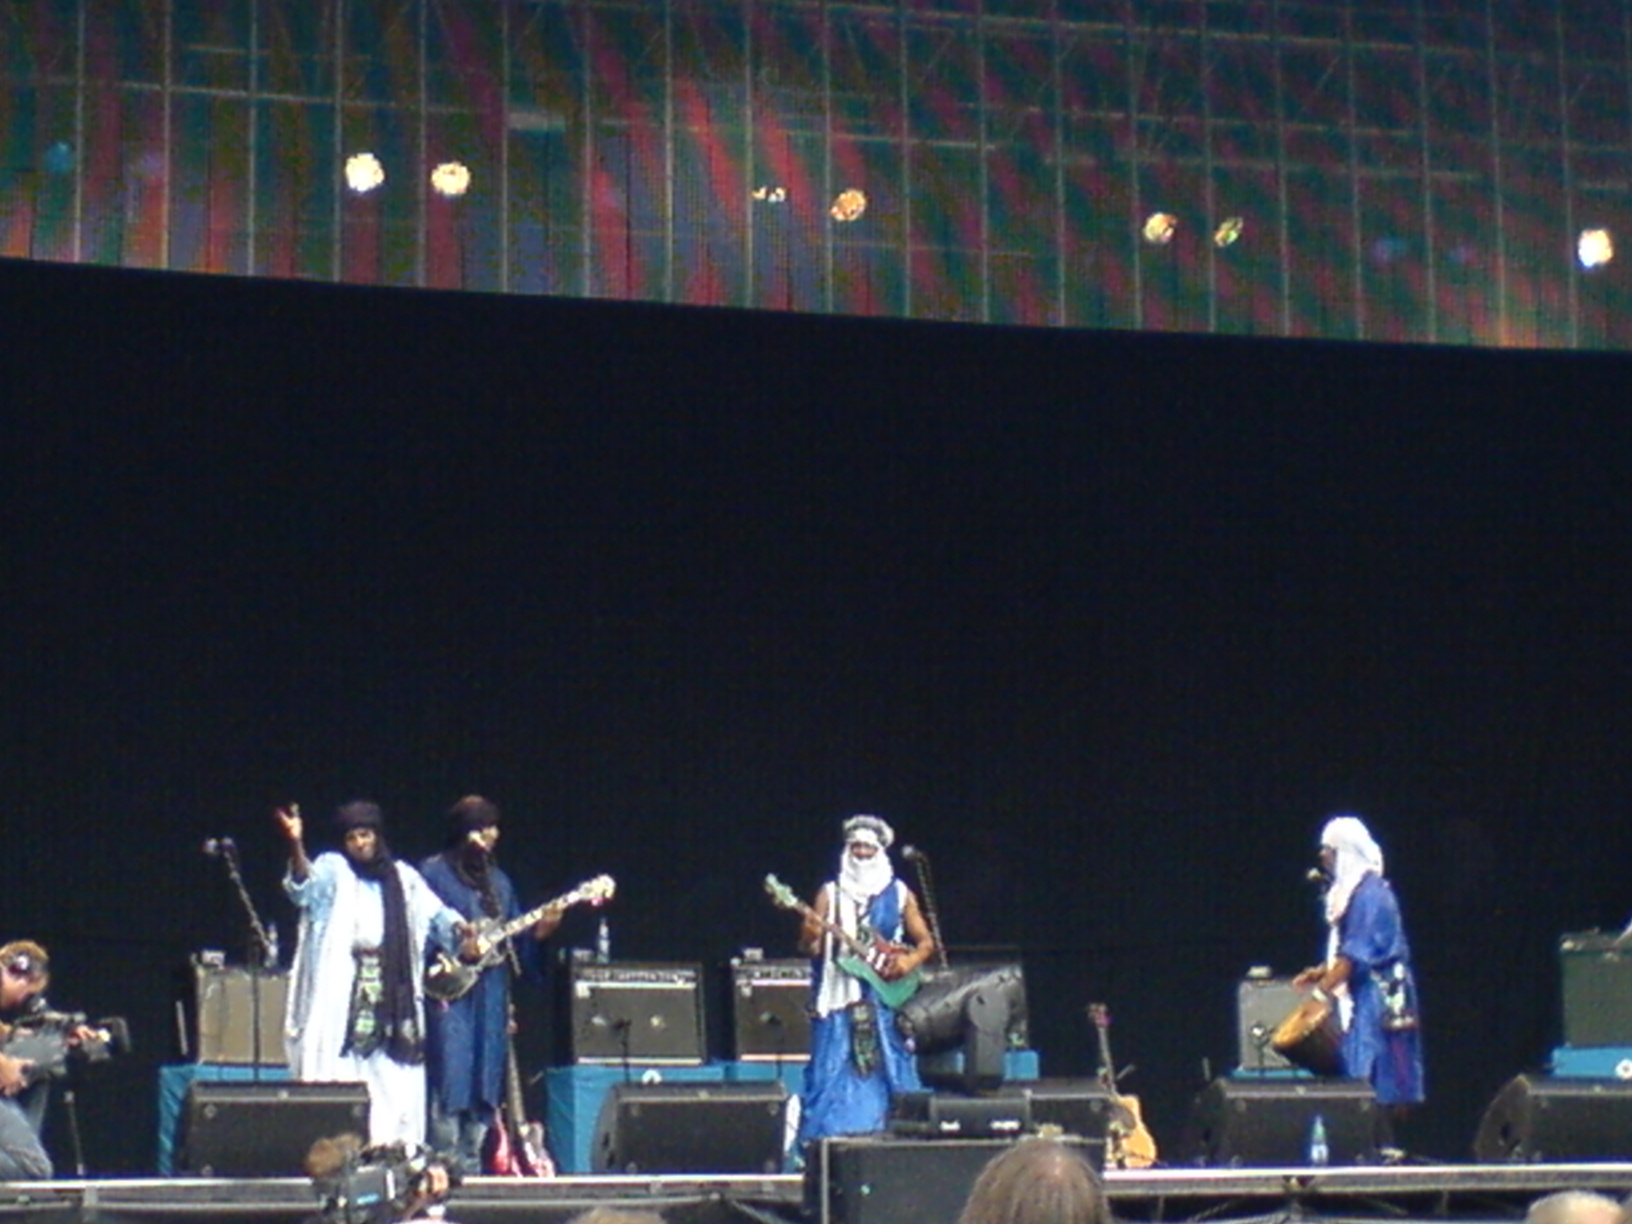 a group of people on stage with guitars